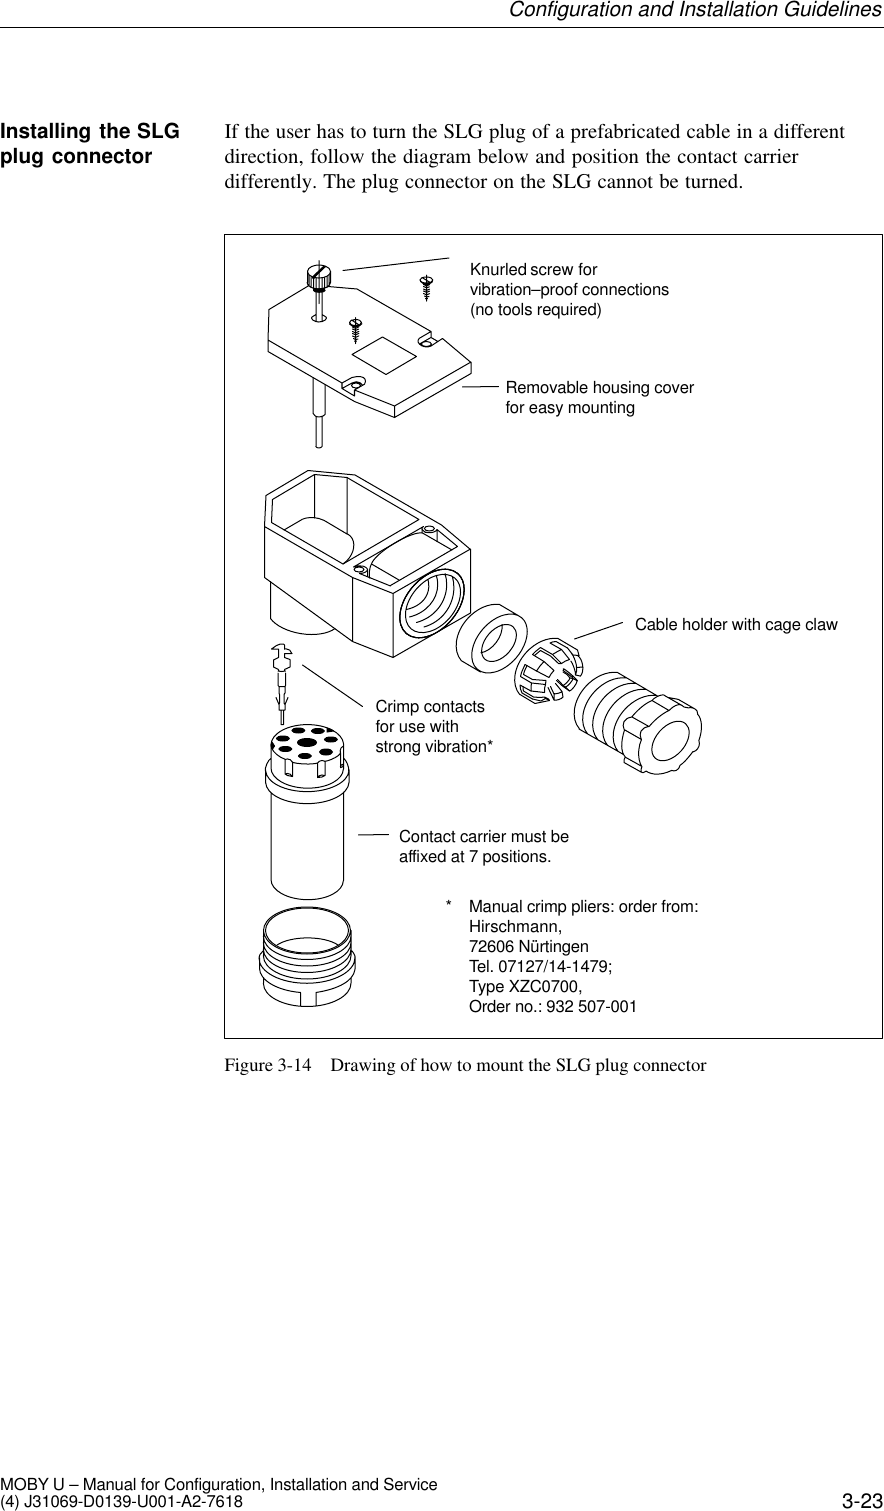 3-23MOBY U – Manual for Configuration, Installation and Service(4) J31069-D0139-U001-A2-7618If the user has to turn the SLG plug of a prefabricated cable in a differentdirection, follow the diagram below and position the contact carrierdifferently. The plug connector on the SLG cannot be turned.Knurled screw forvibration–proof connections(no tools required)Removable housing coverfor easy mountingCable holder with cage clawCrimp contactsfor use withstrong vibration*Contact carrier must beaffixed at 7 positions.* Manual crimp pliers: order from:Hirschmann,72606 NürtingenTel. 07127/14-1479;Type XZC0700,Order no.: 932 507-001Figure 3-14 Drawing of how to mount the SLG plug connectorInstalling the SLGplug connectorConfiguration and Installation Guidelines